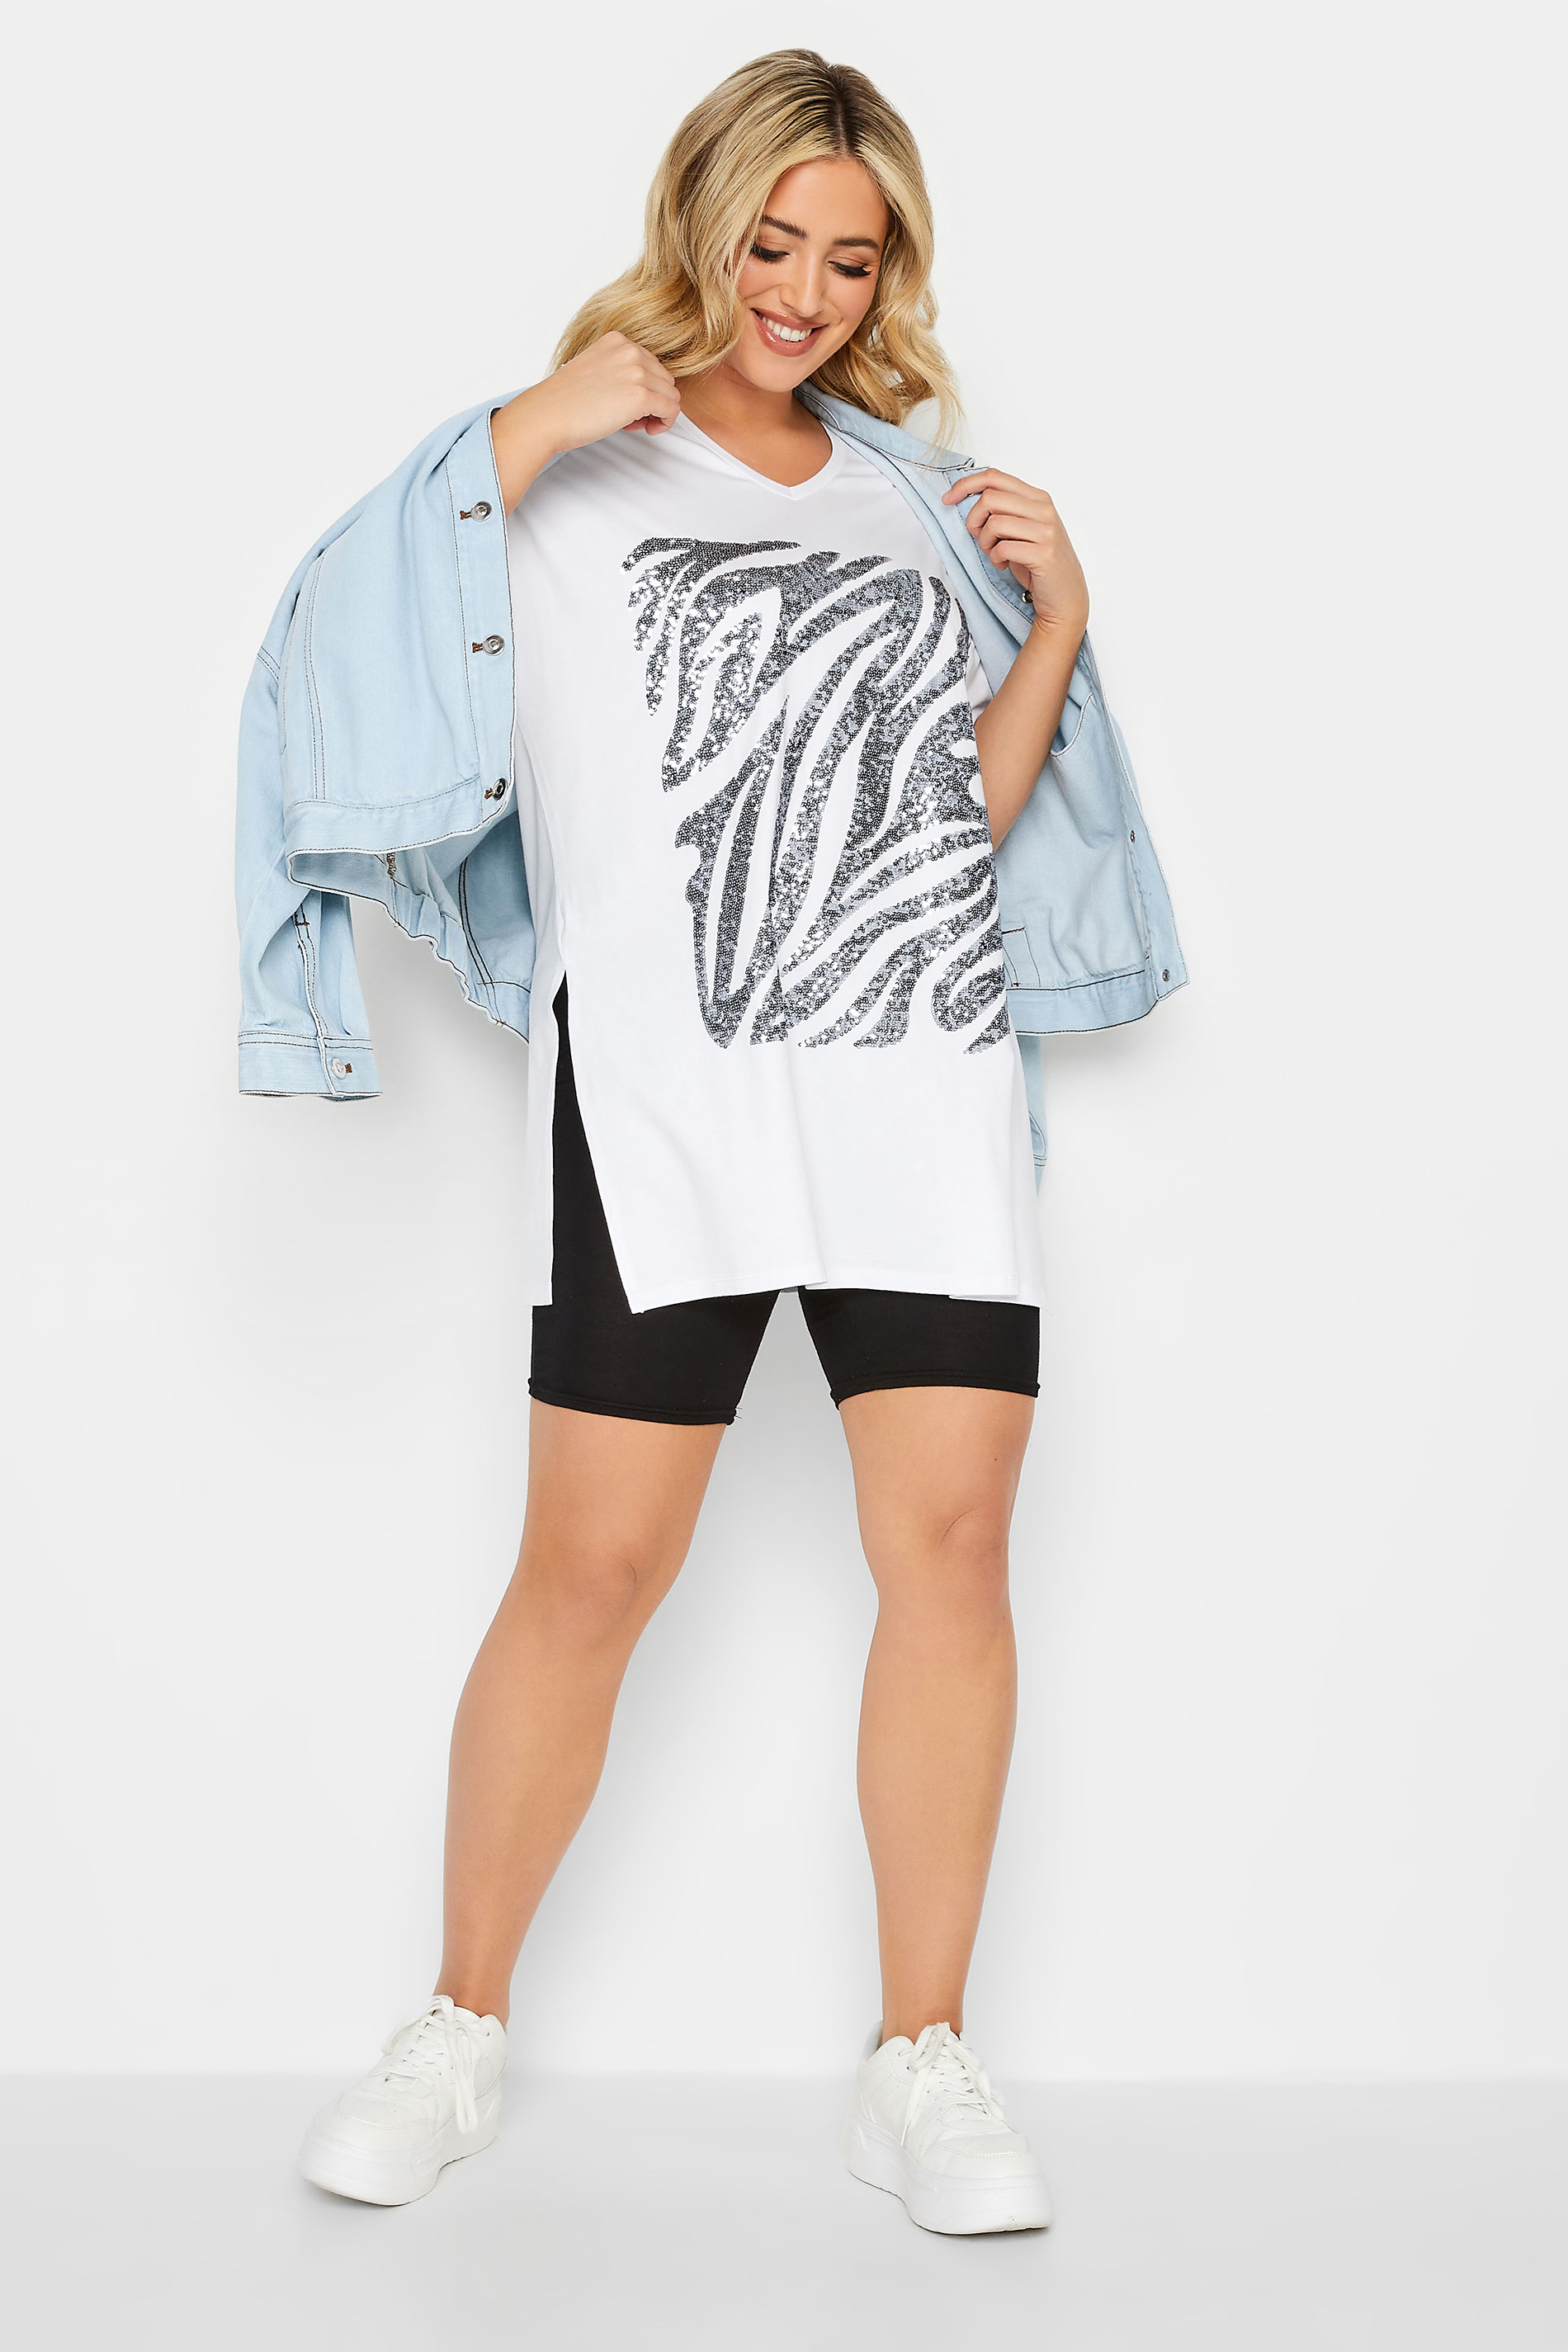 YOURS Plus Size White Zebra Print Sequin Top | Yours Clothing 3